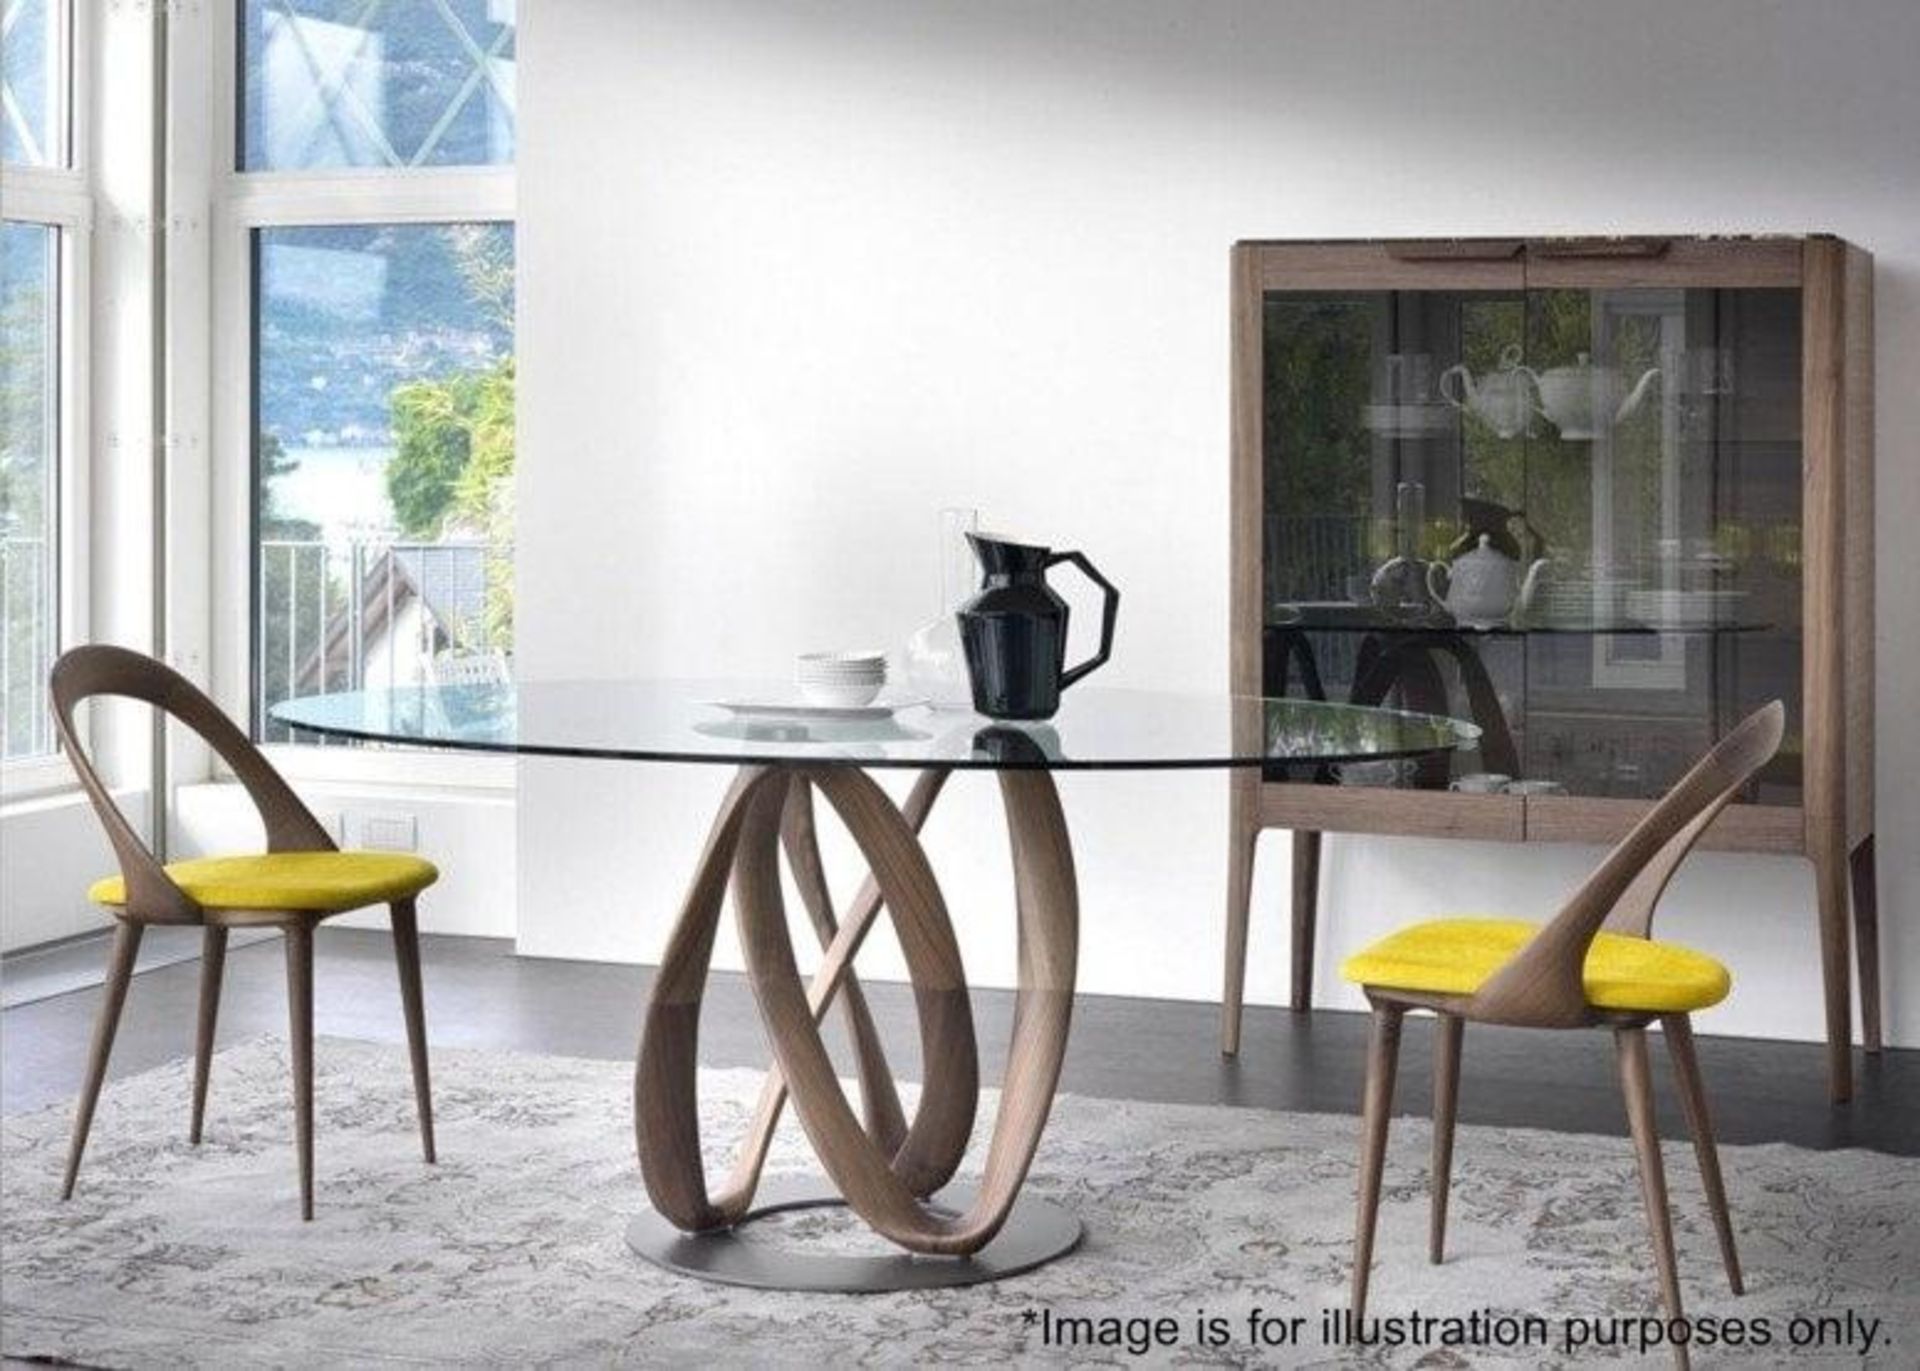 1 x PORADA 'Infinity' 2-Metre Designer Dining Table With Elliptical Glass And Canaletta Walnut Base